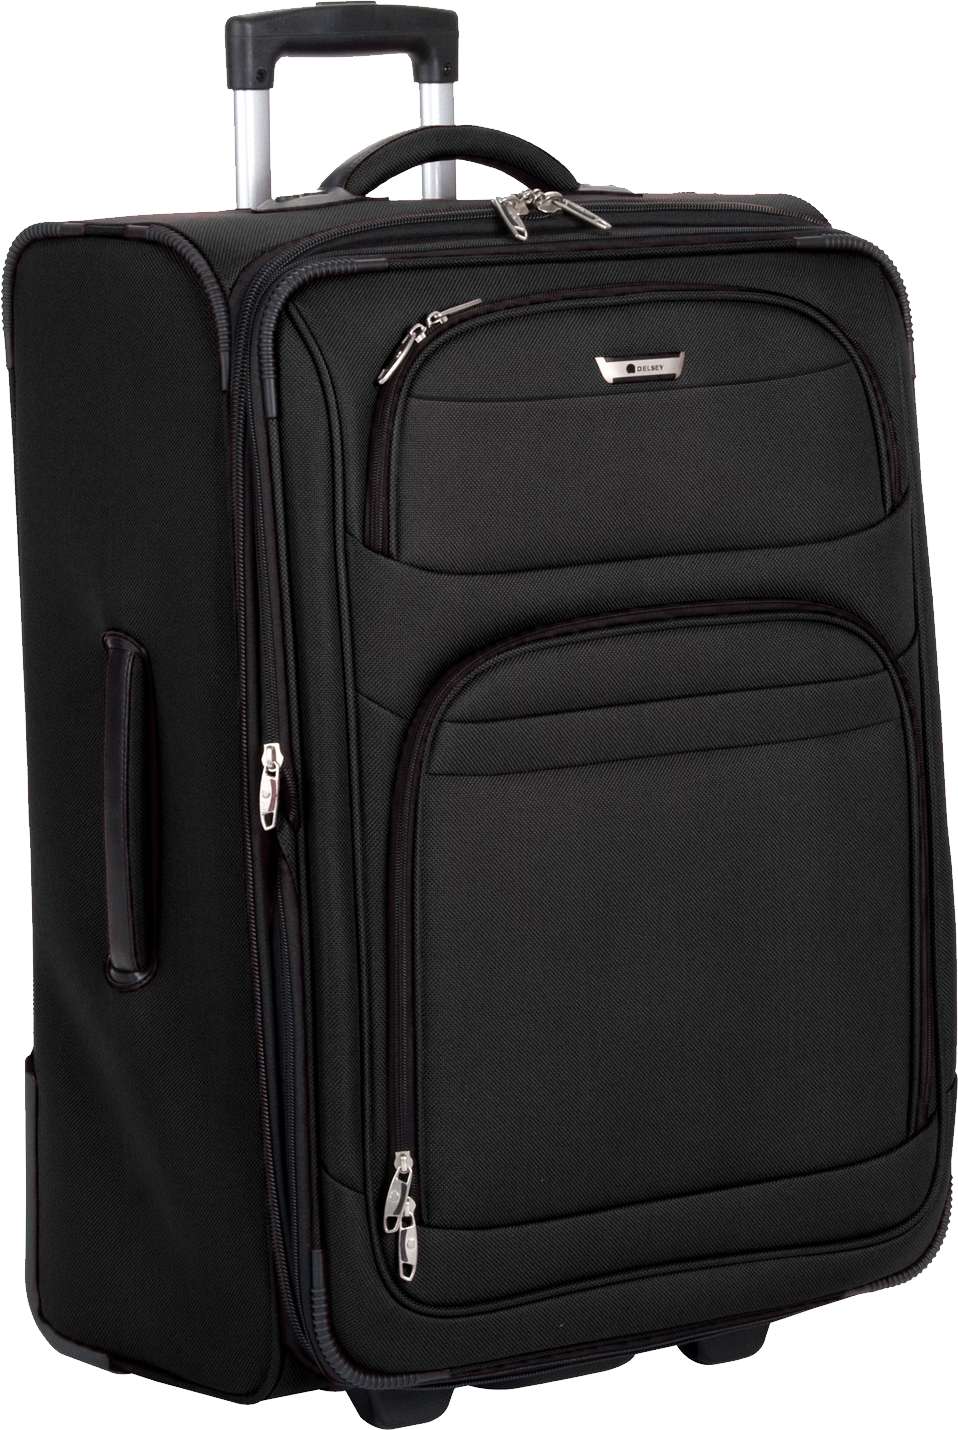 A Black Suitcase With Zippers